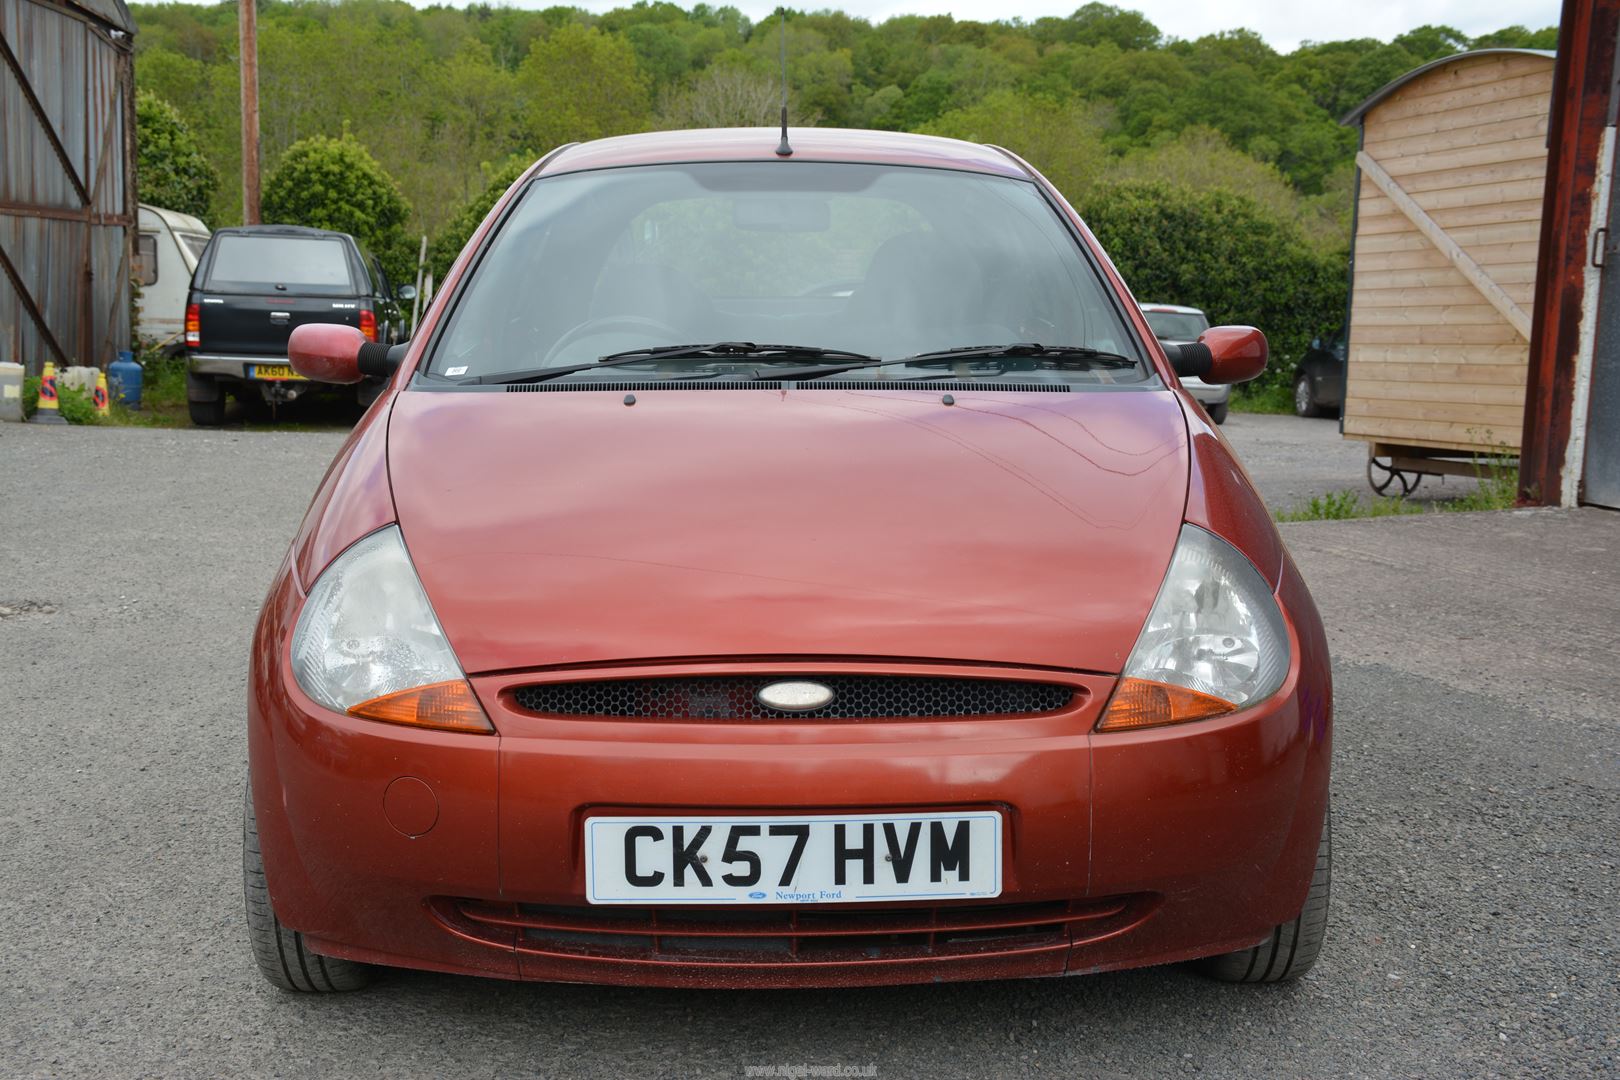 A Ford KA Zetec Climate 1299cc petrol-engined three door hatchback motor Car finished in red, - Image 2 of 14